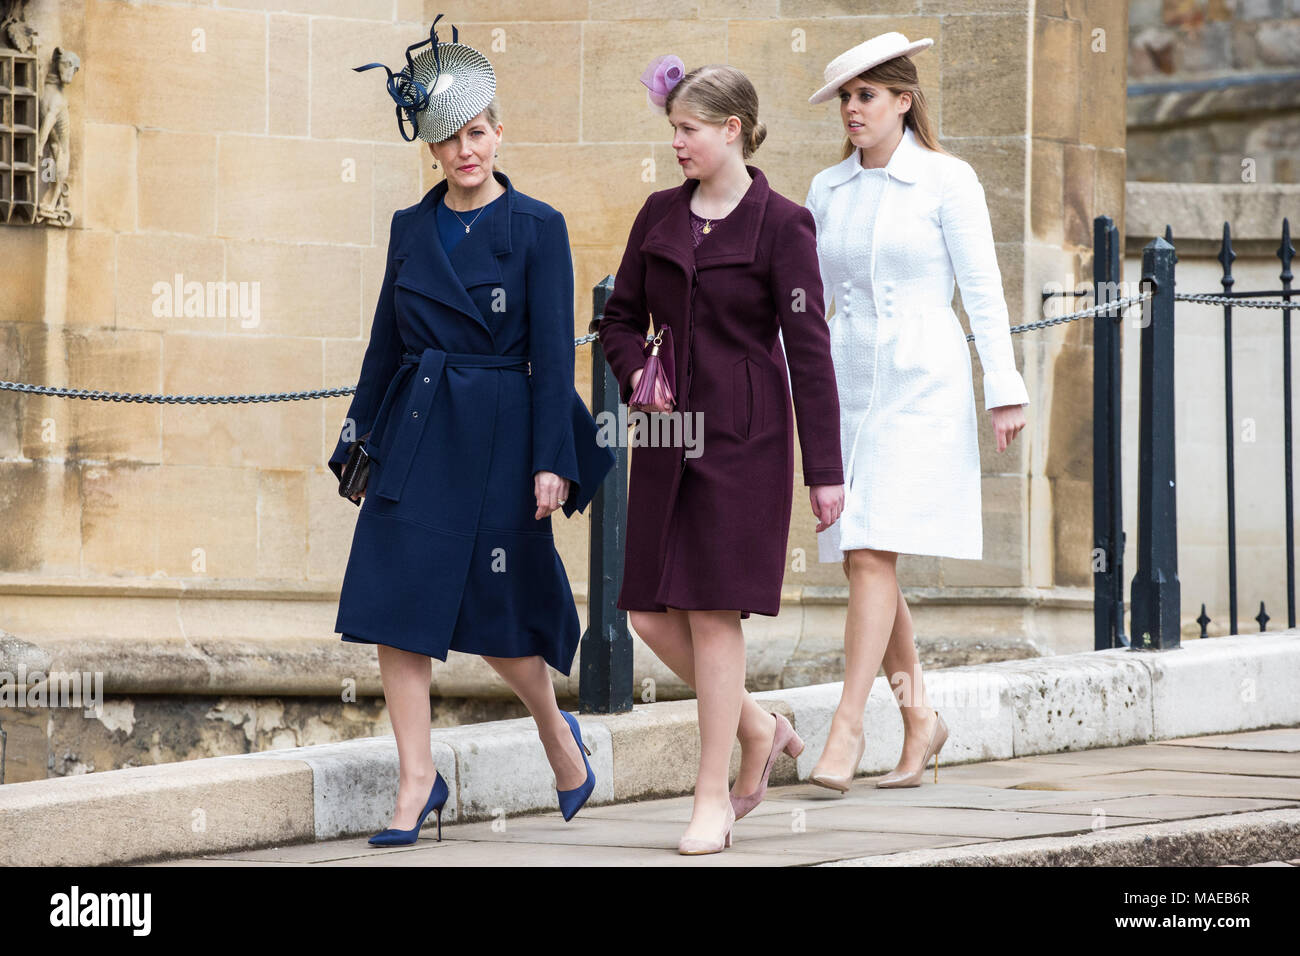 Windsor, UK. 1st April, 2018. The Countess of Wessex, Lady Louise Windsor and Princess Beatrice arrive to attend the Easter Sunday service at St George's Chapel in Windsor Castle. Credit: Mark Kerrison/Alamy Live News Stock Photo